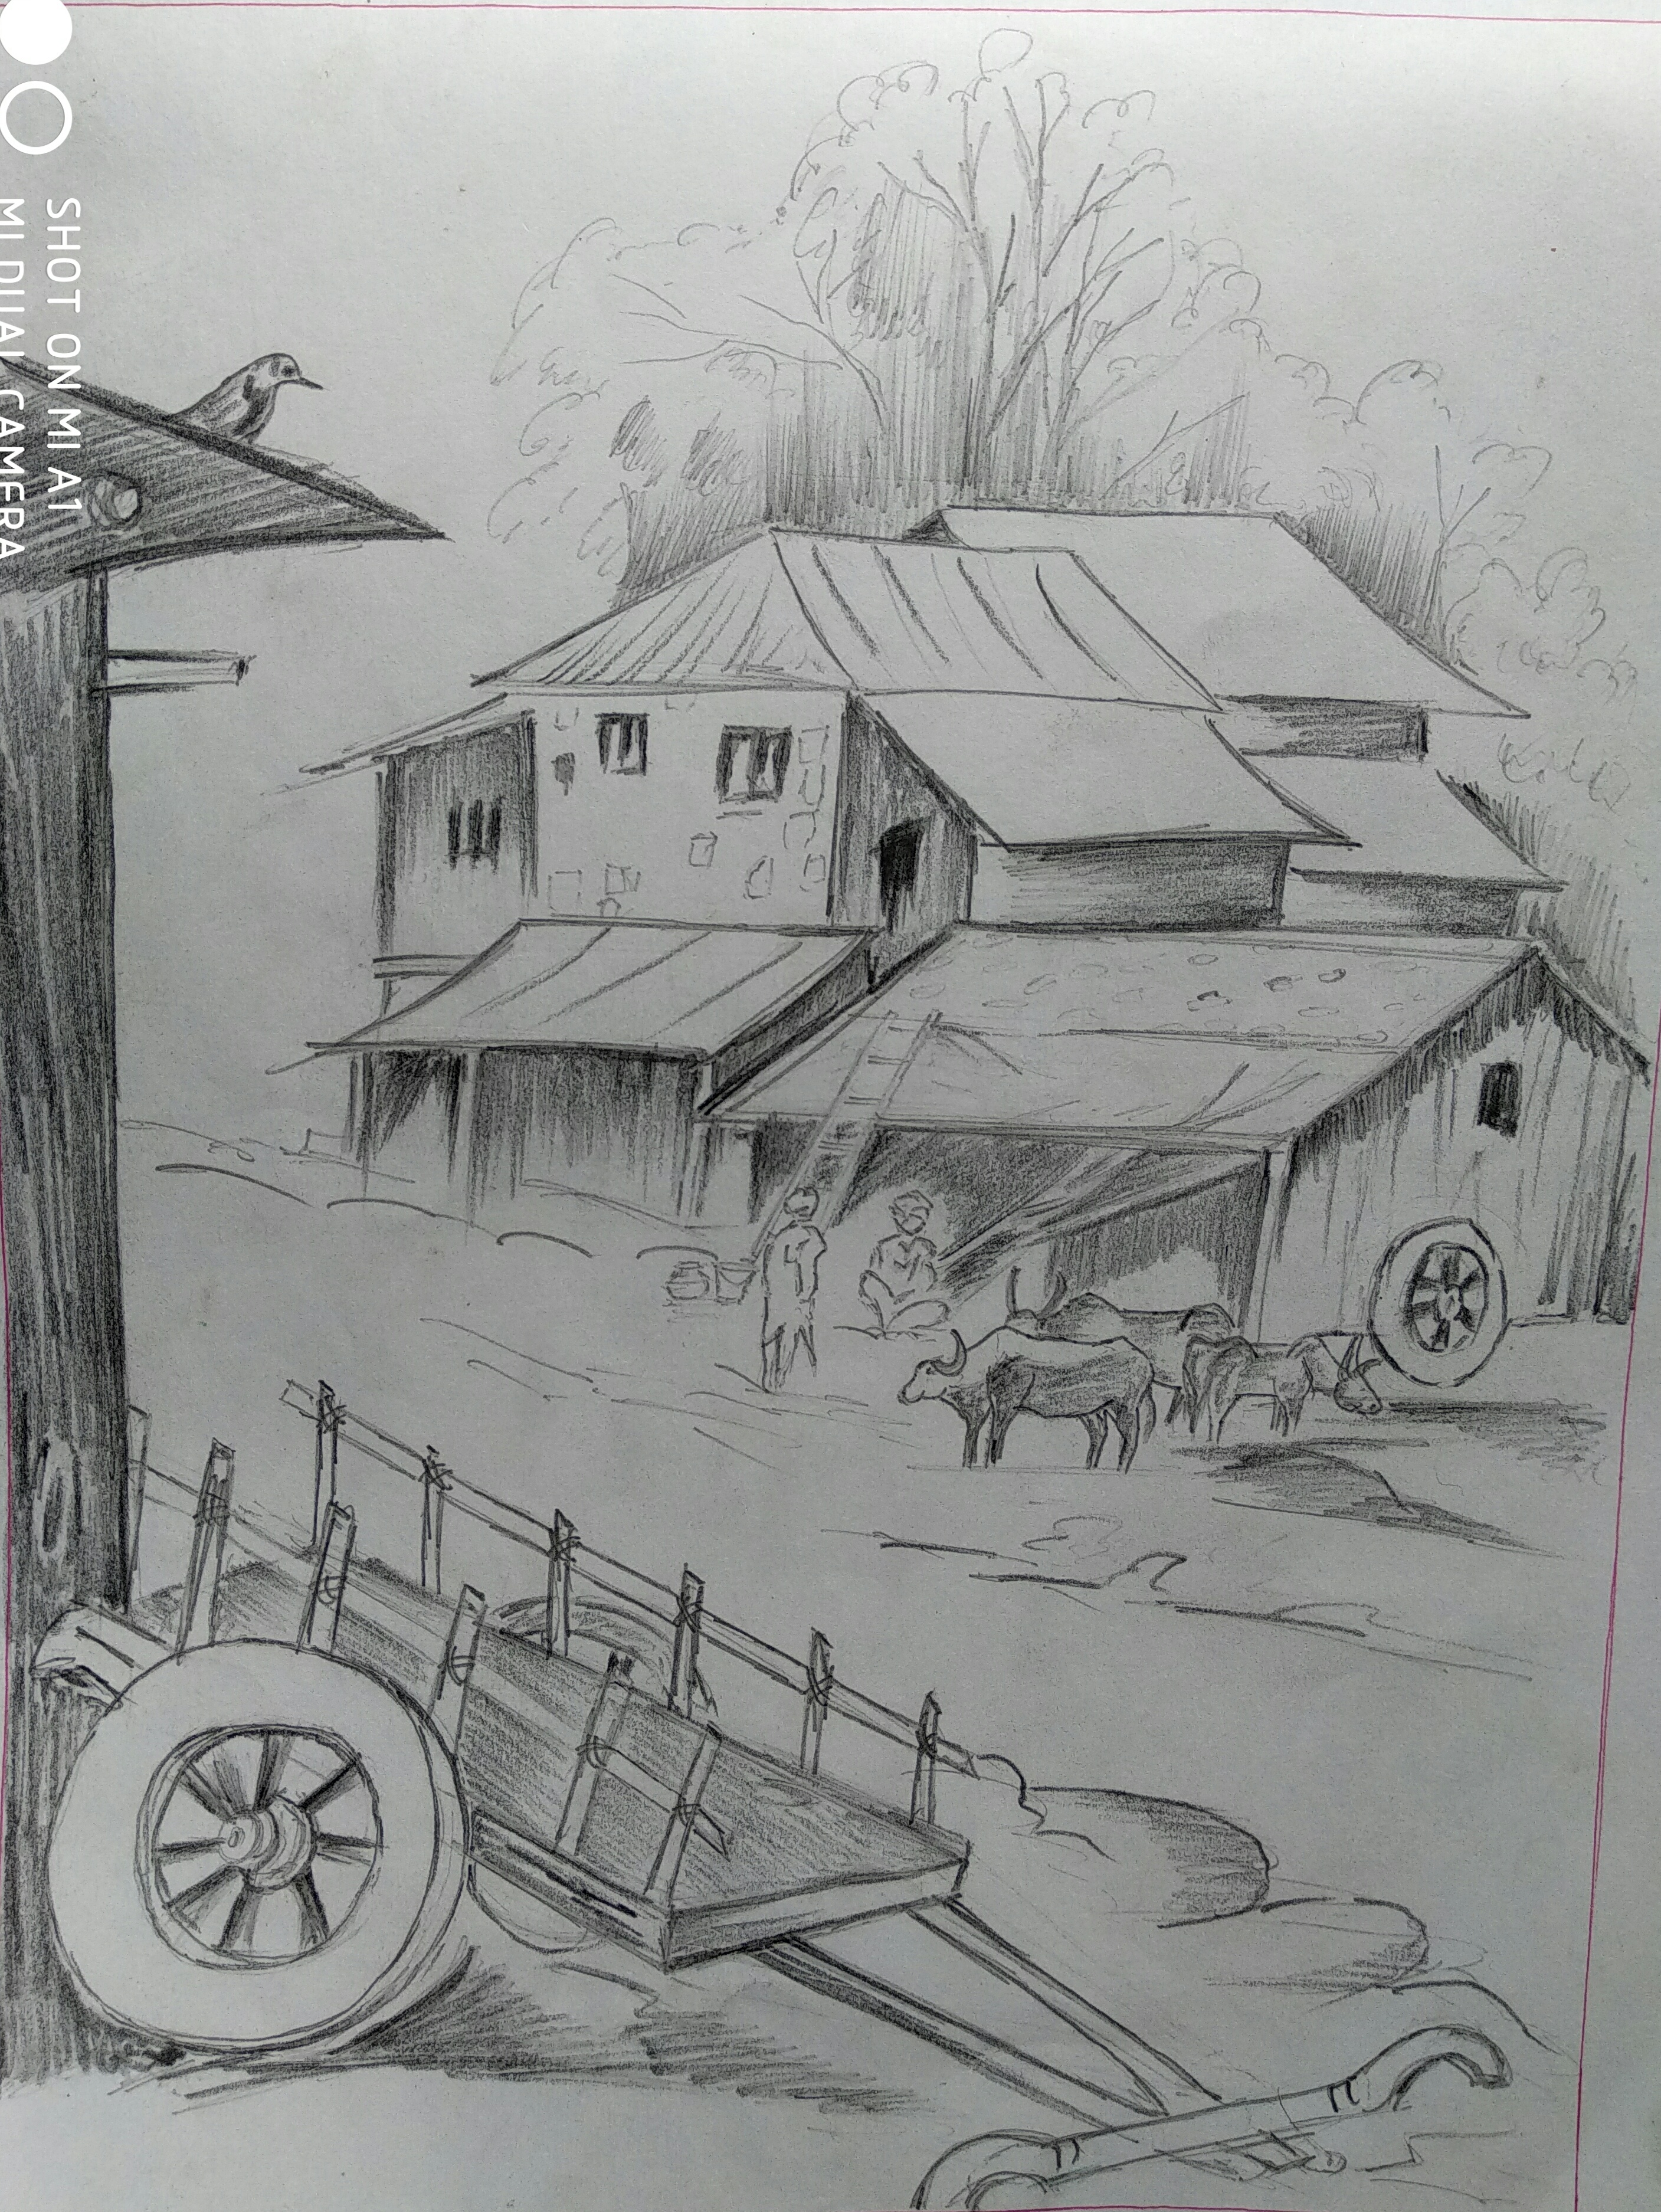 Village life drawing by Mark Shillaker | Doodle Addicts